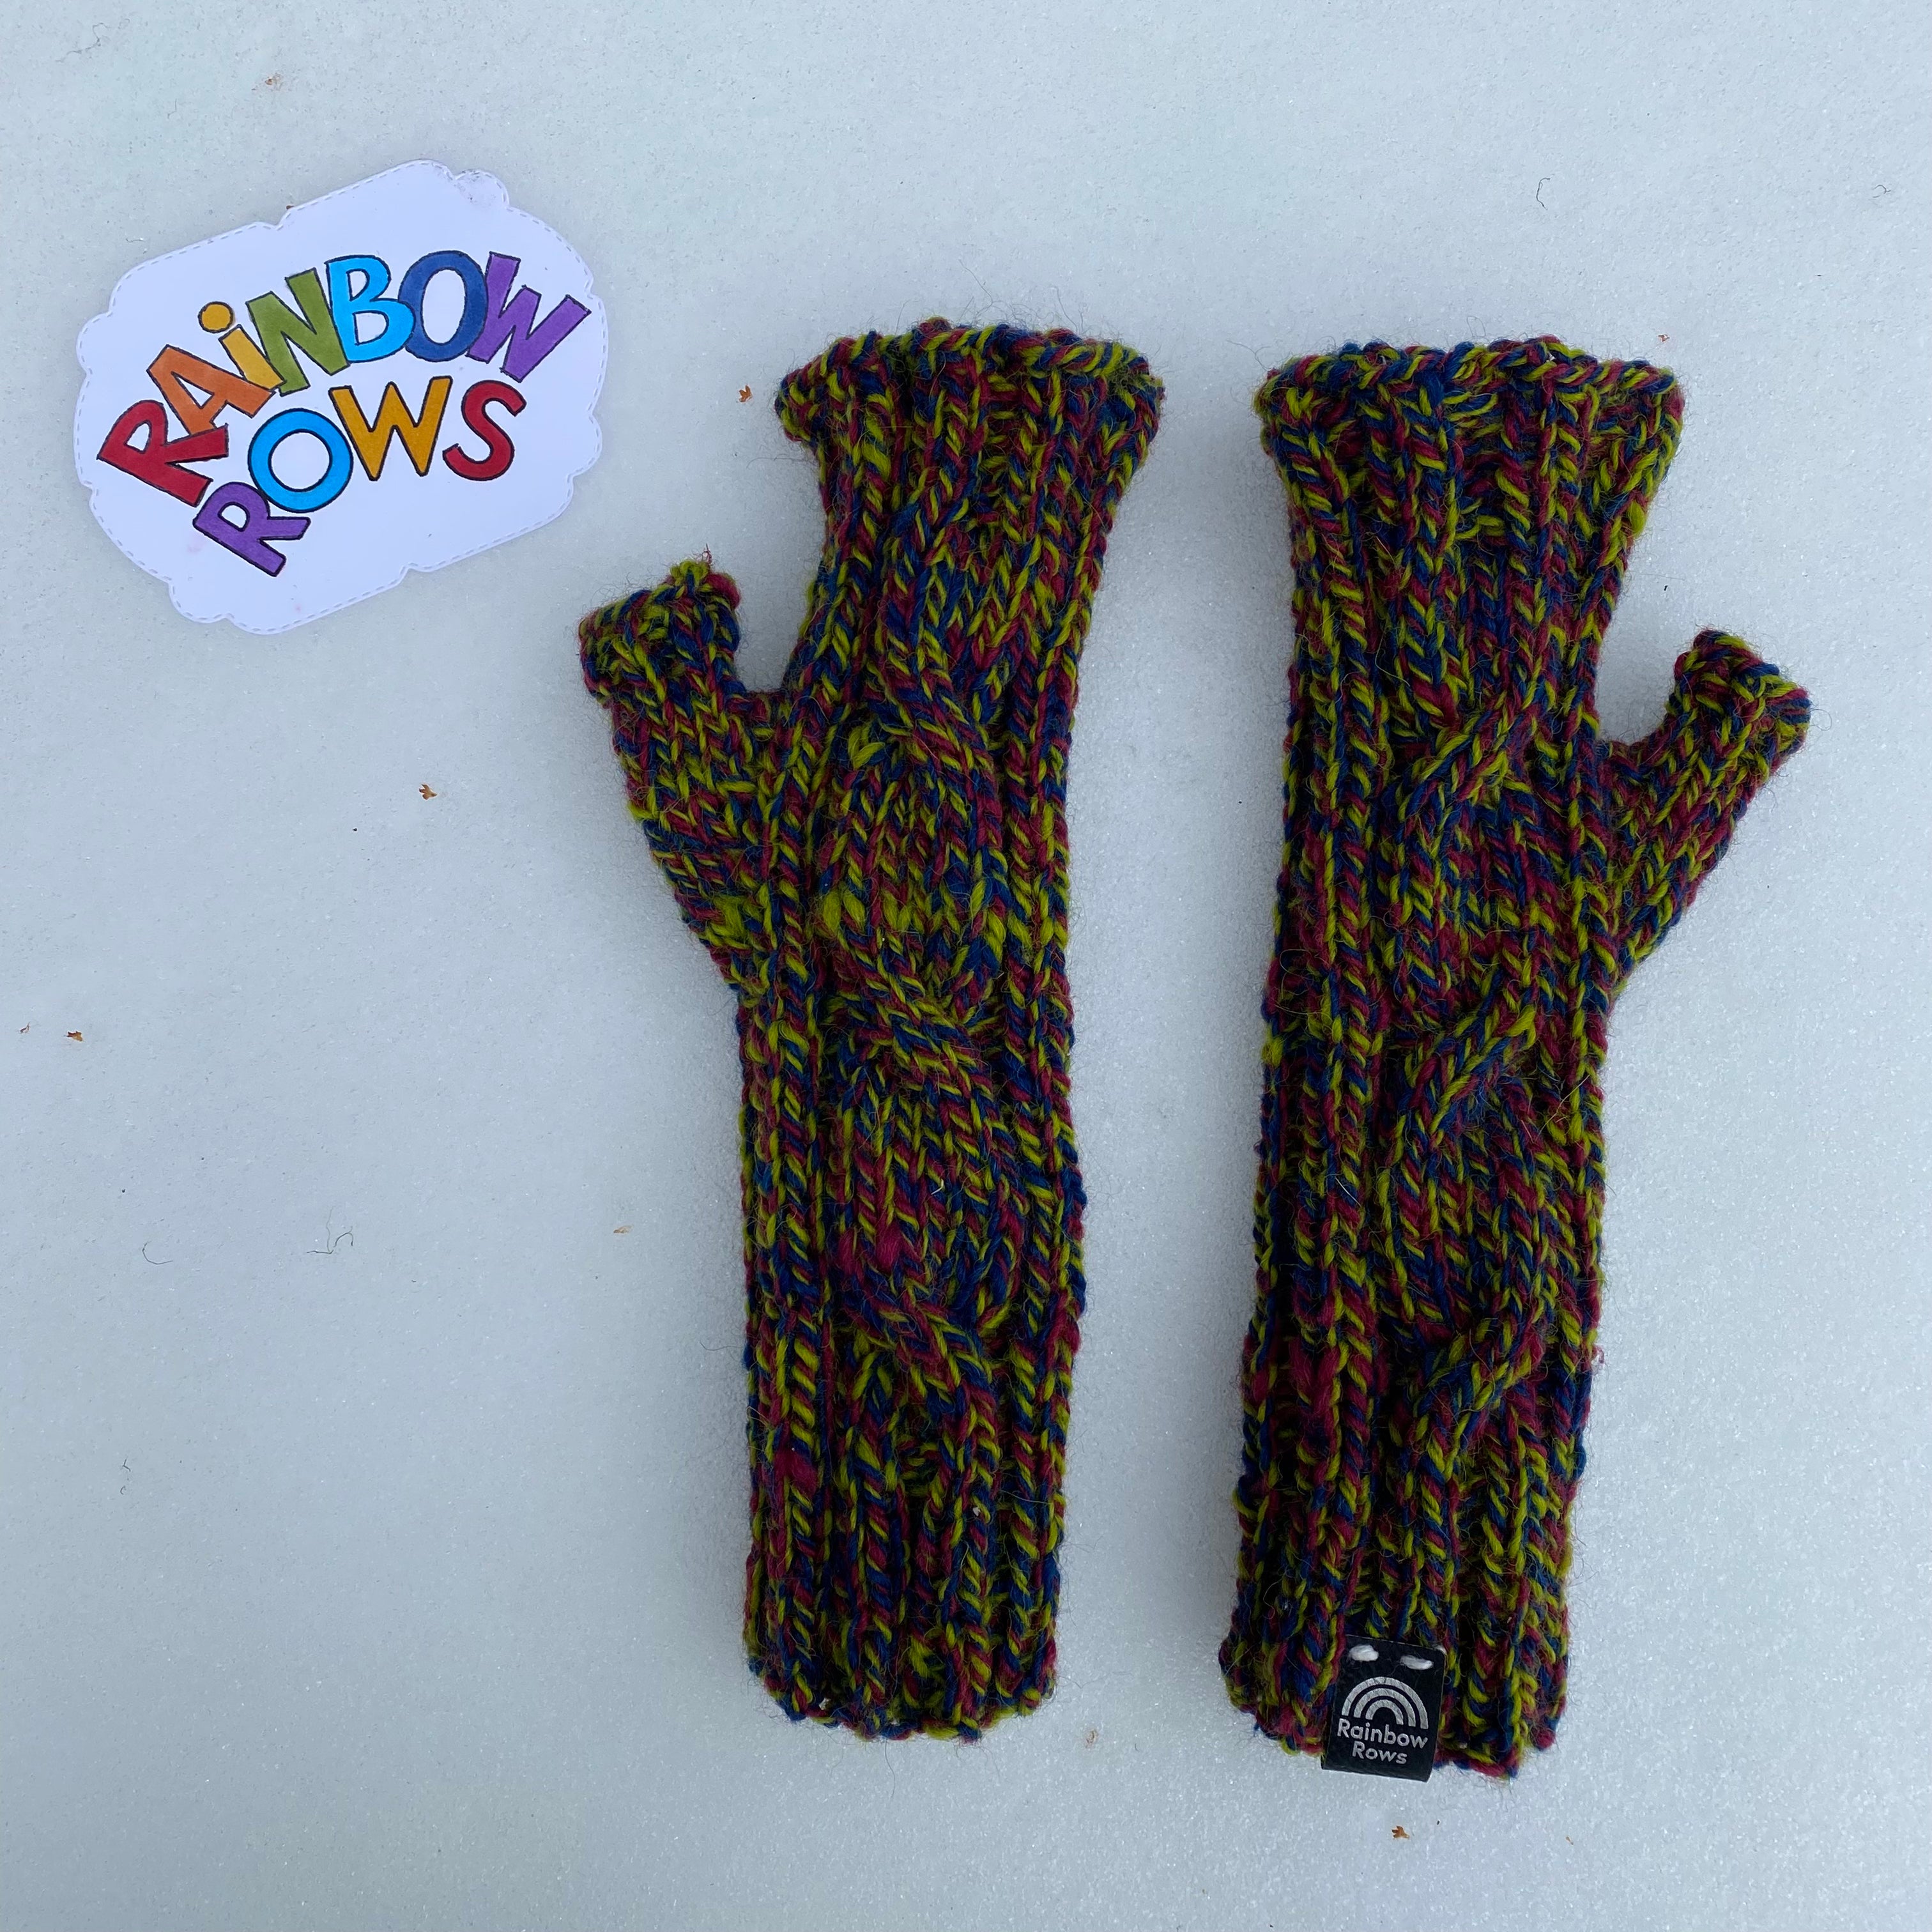 Kamloops Forest Cabled Fingerless Gloves